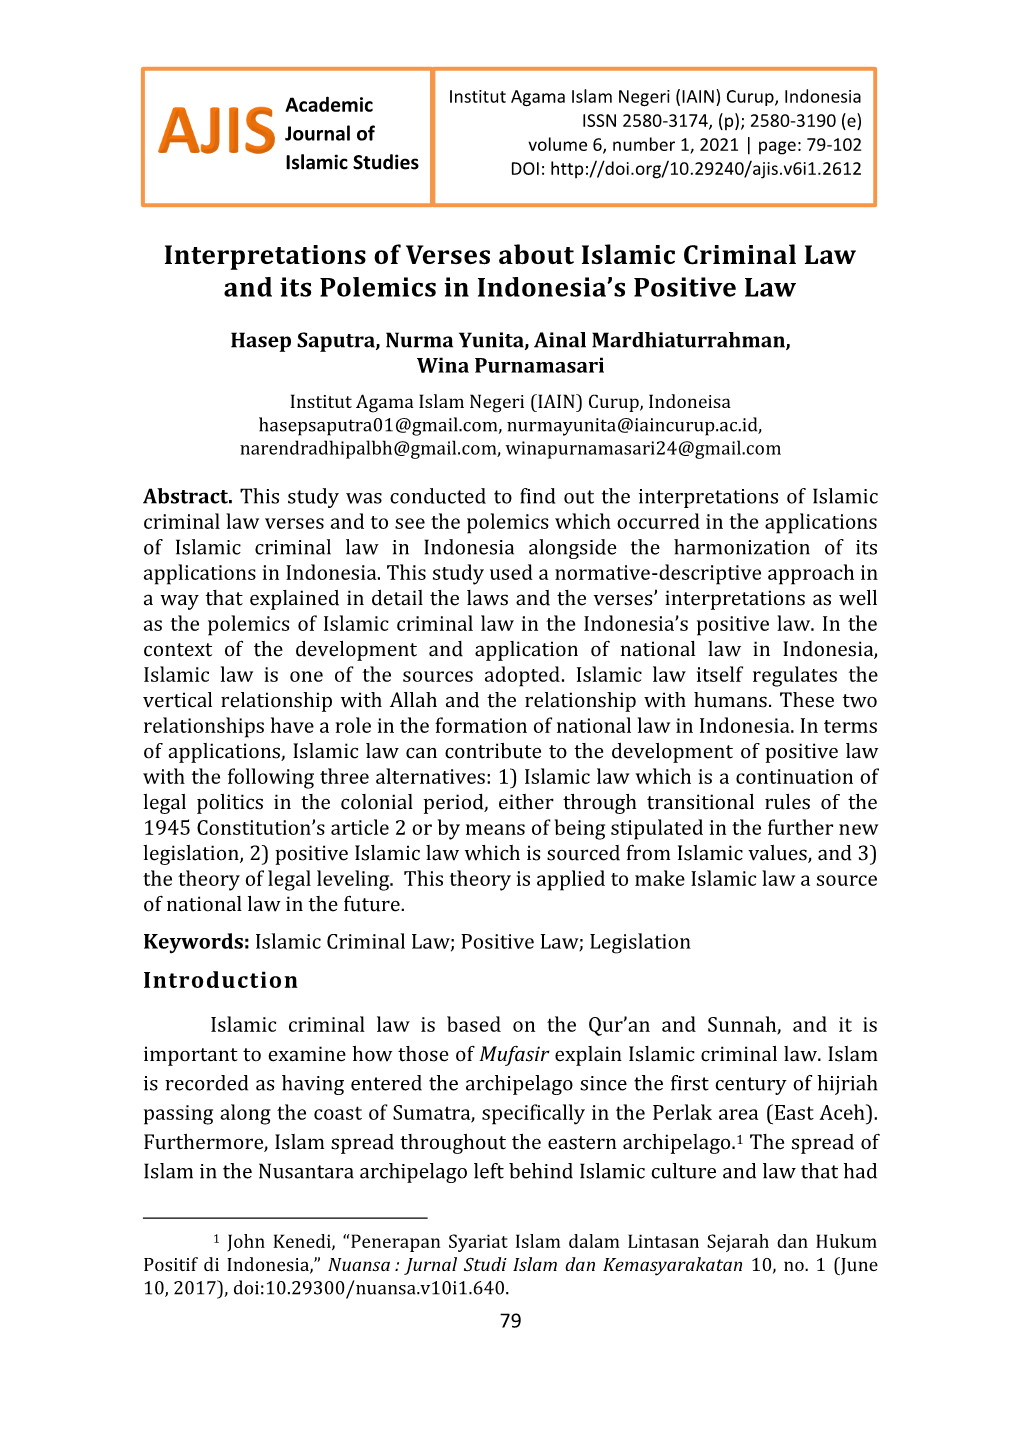 Interpretations of Verses About Islamic Criminal Law and Its Polemics in Indonesia’S Positive Law